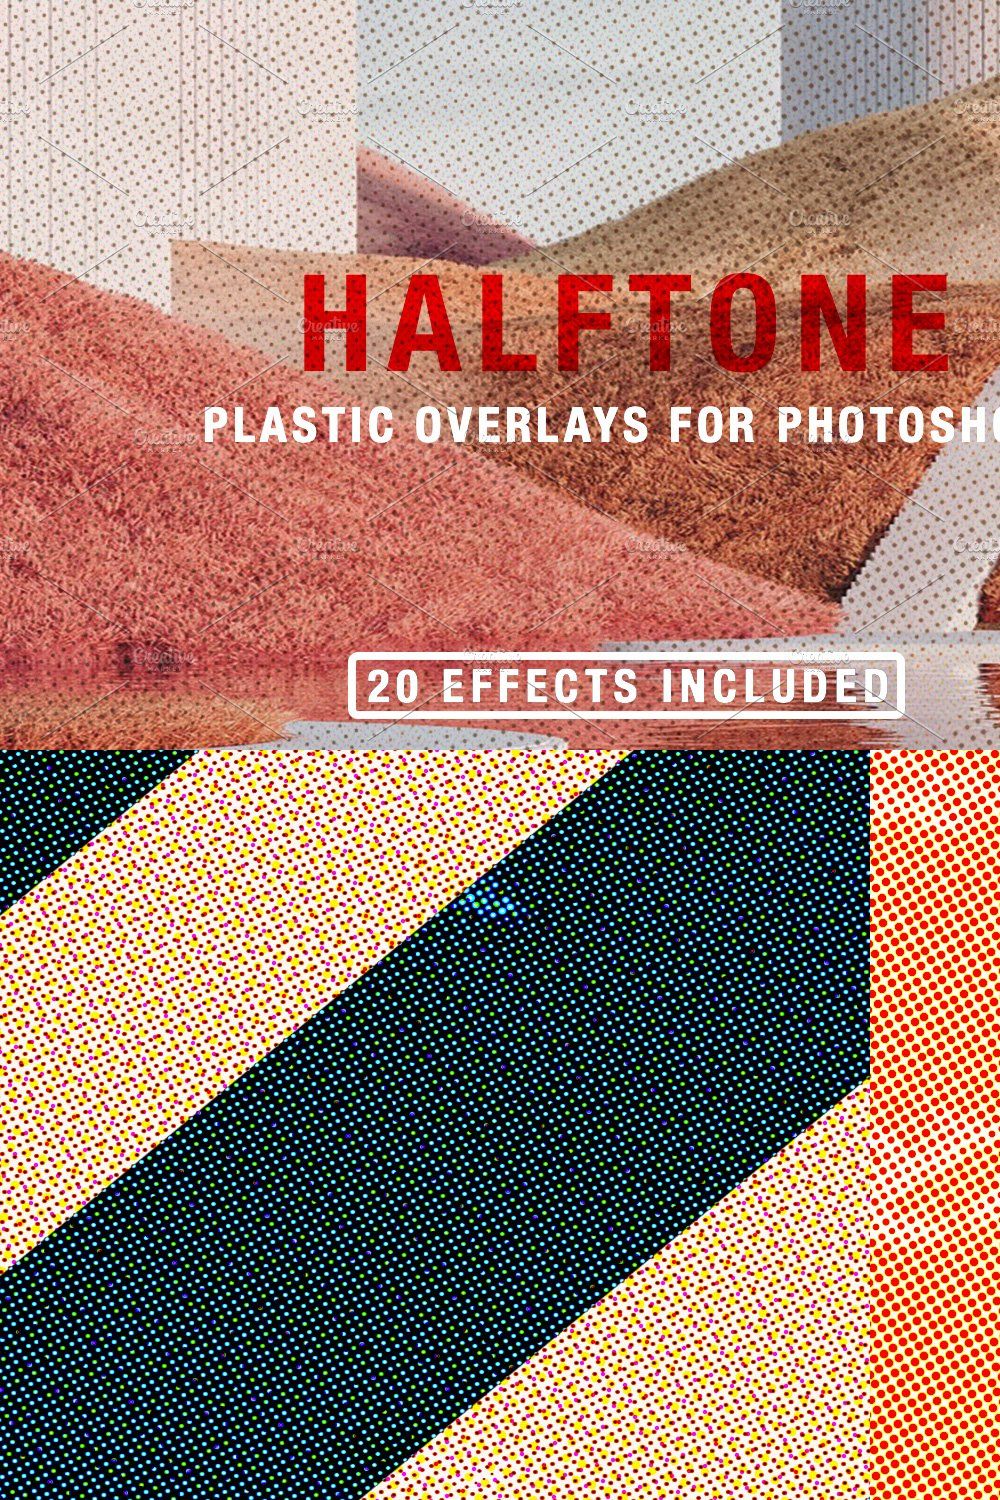 Halftone + Plastic Overlays pinterest preview image.